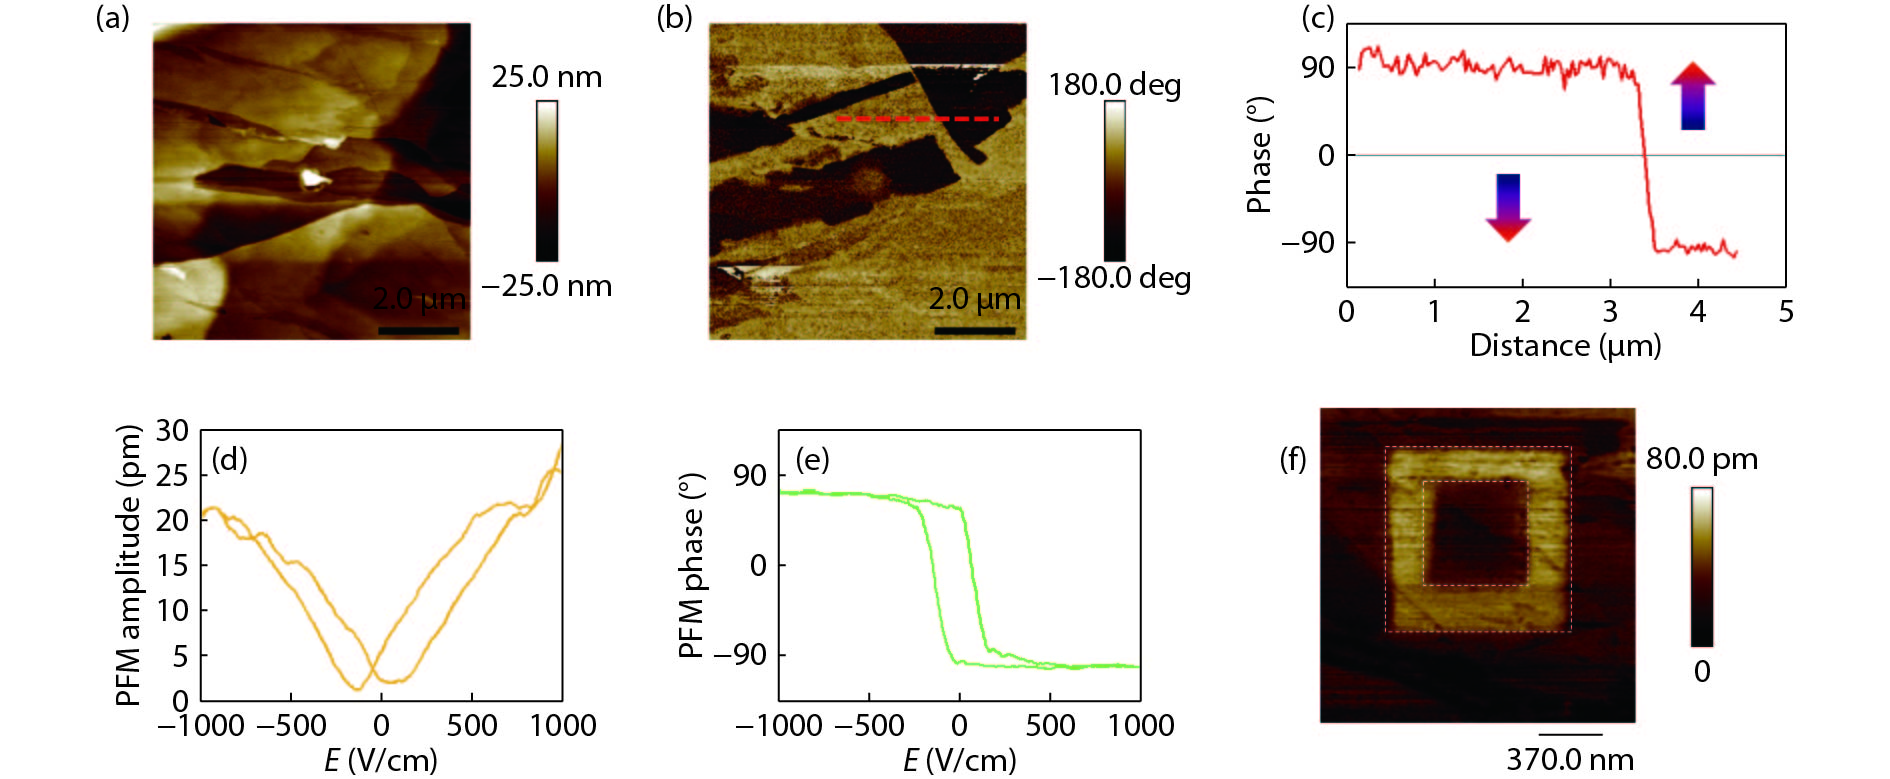 (Color online) Ferroelectricity of α-In2Se3 thin layers. (a) The surface topography of α-In2Se3 thin layers (~20 nm) on the heavily doped Si substrate. The scale bar is 2 μm. (b) The corresponding PFM phase image in the out-of-plane direction, showing clear ferroelectric domains. (c) The phase profile of different ferroelectric domains as sketched by the red dashed line in (b). A phase contrast of 180° is observed, which indicates the antiparallel directions of out-of-plane electric polarization between the adjacent domains. The arrows indicate the directions of electric polarization. (d) PFM amplitude and (e) PFM phase hysteresis loop measured from α-In2Se3 thin layers. (f) PFM amplitude image of domain engineering in α-In2Se3 with a film thickness of 12 nm. The scale bar is 370 nm. (Courtesy of Ref. [24])